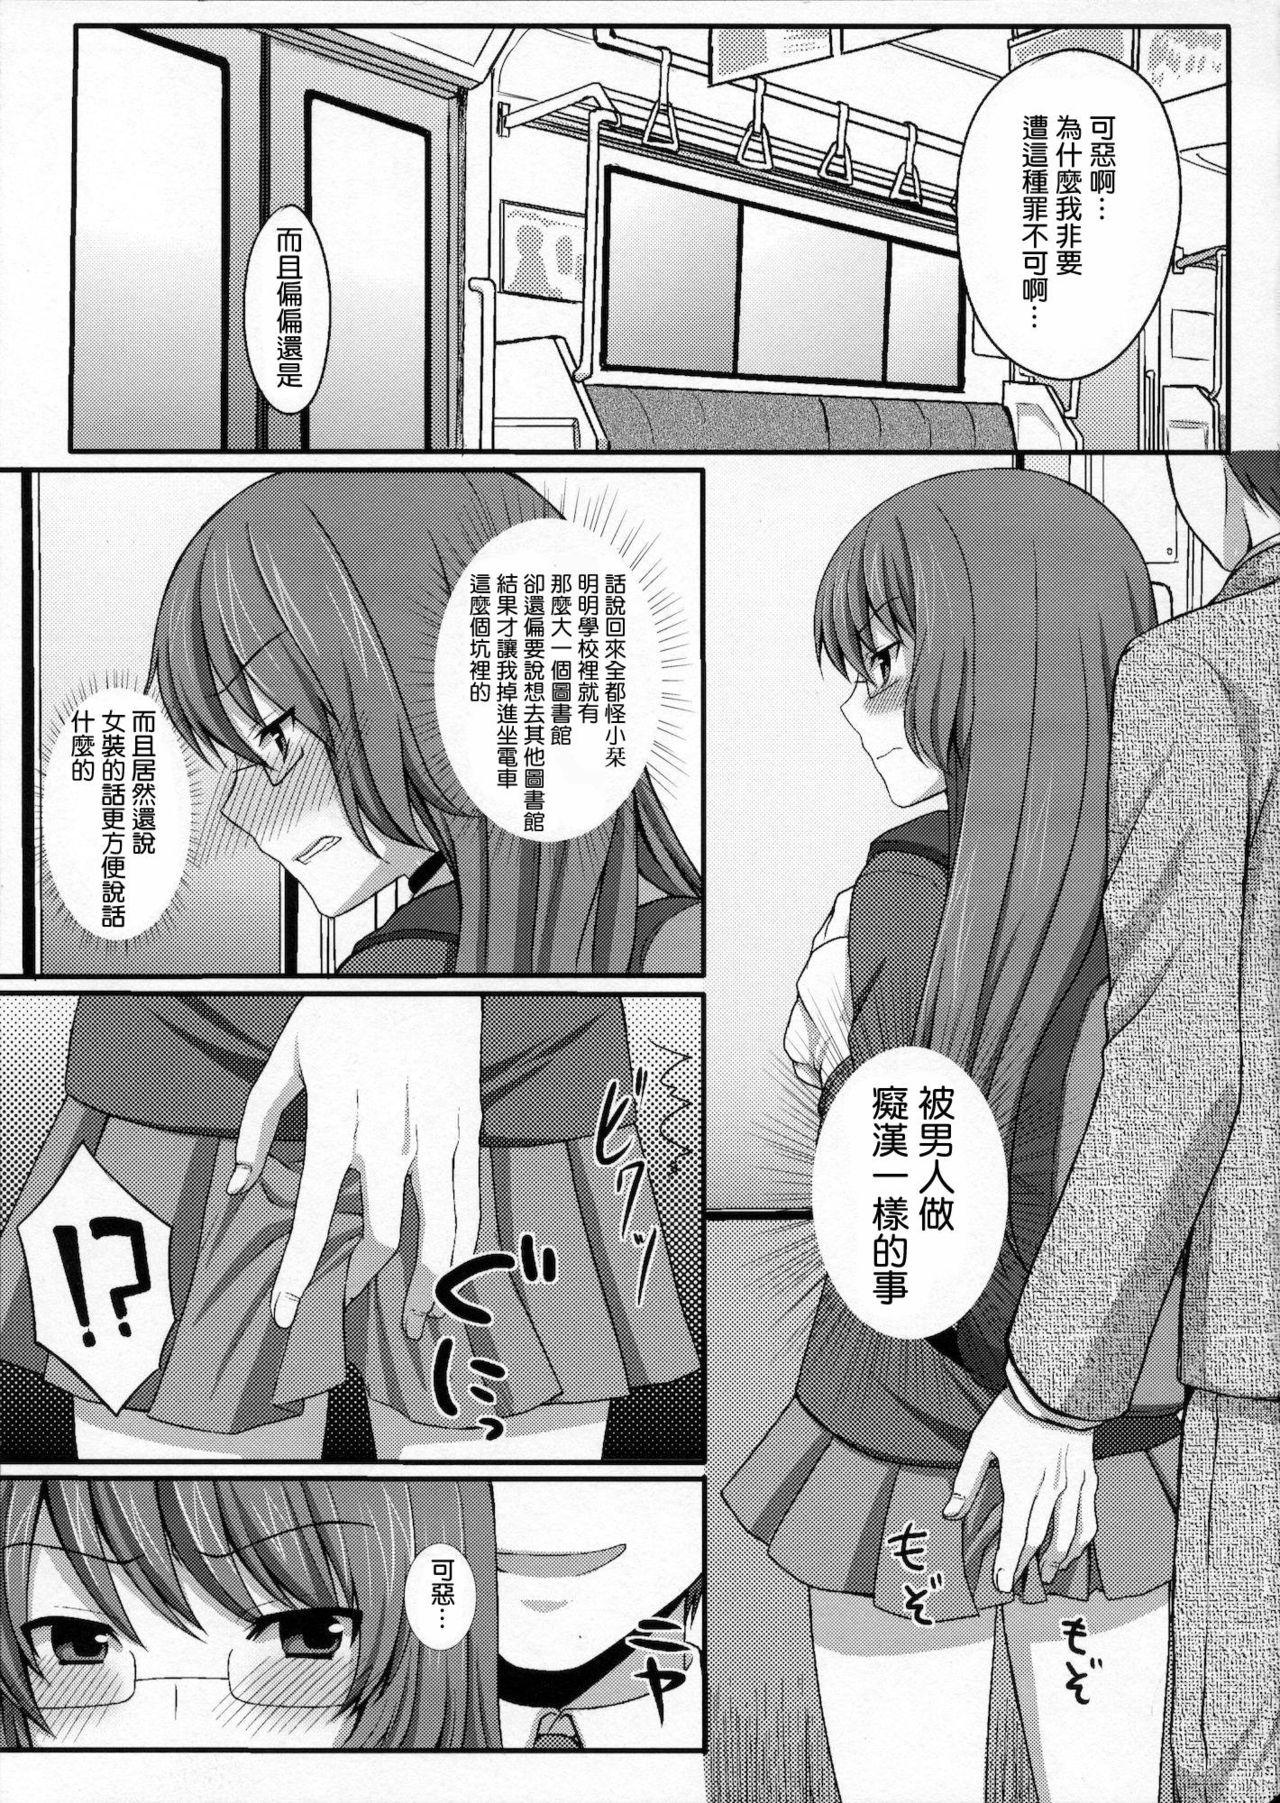 Porno Amateur Kami-sama o Chikan - The world god only knows Chile - Page 2